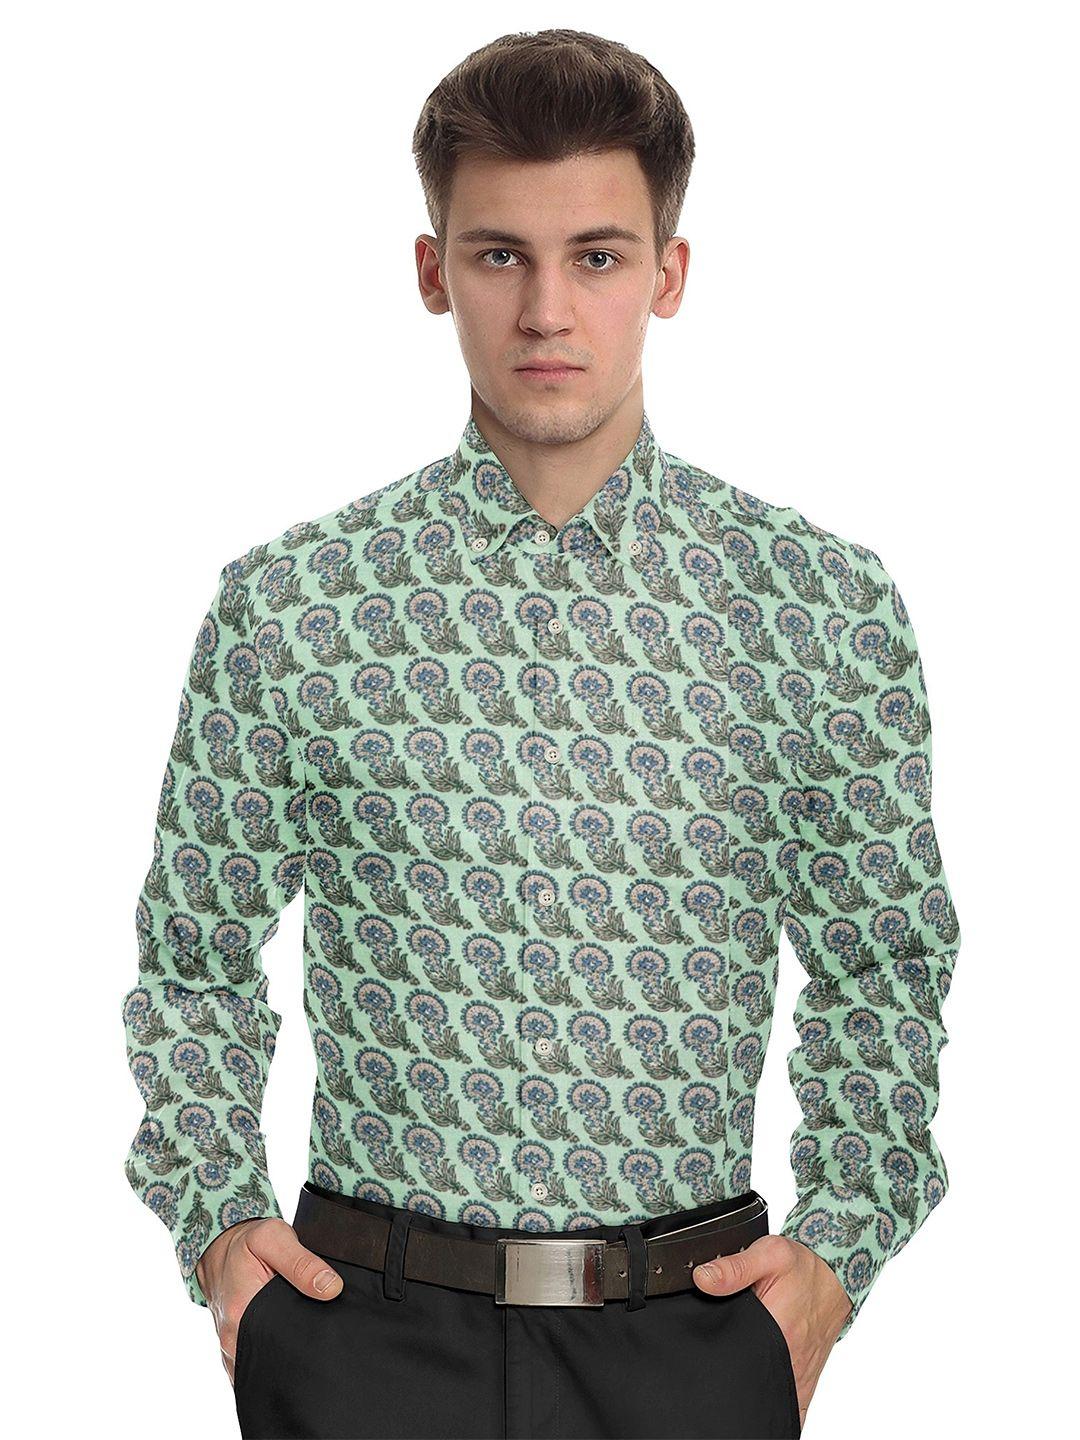 misbis relaxed floral printed slim fit opaque pure cotton casual shirt